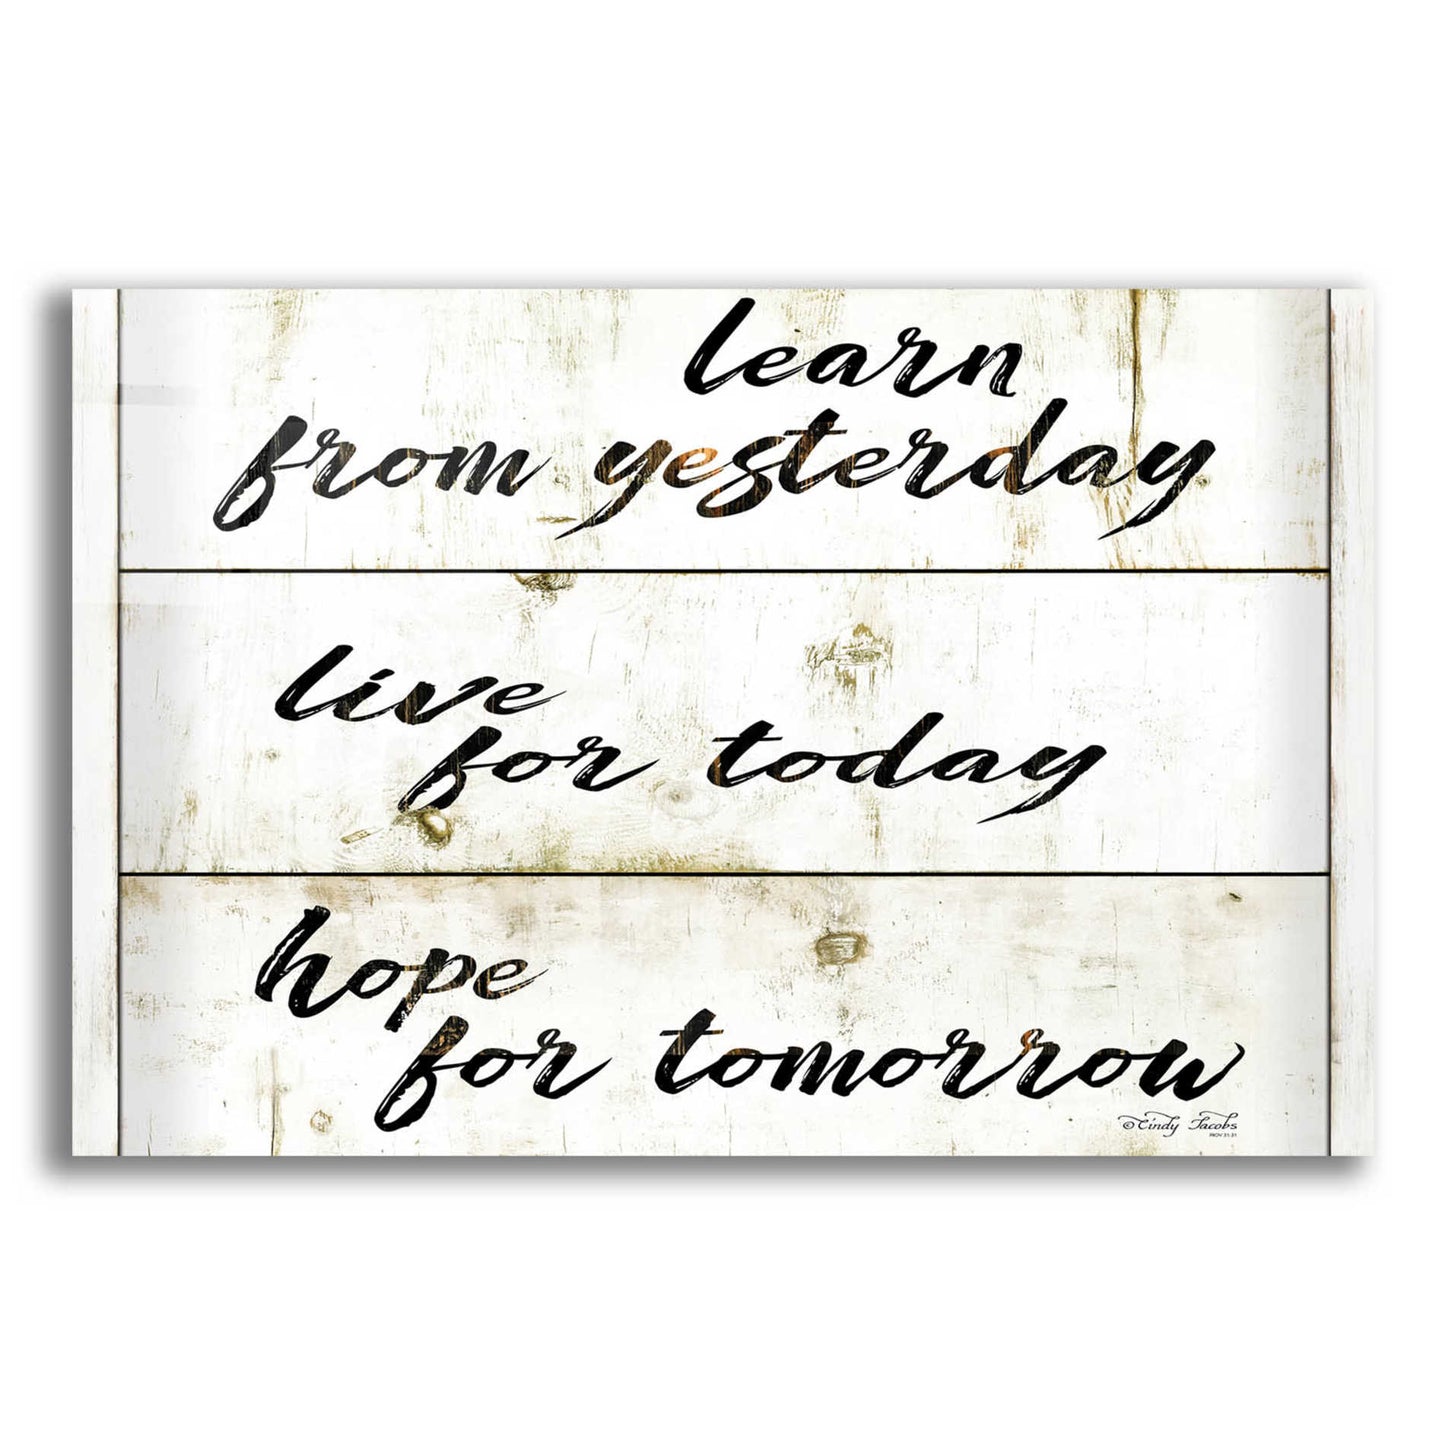 Epic Art 'Live for Today' by Cindy Jacobs, Acrylic Glass Wall Art,24x16